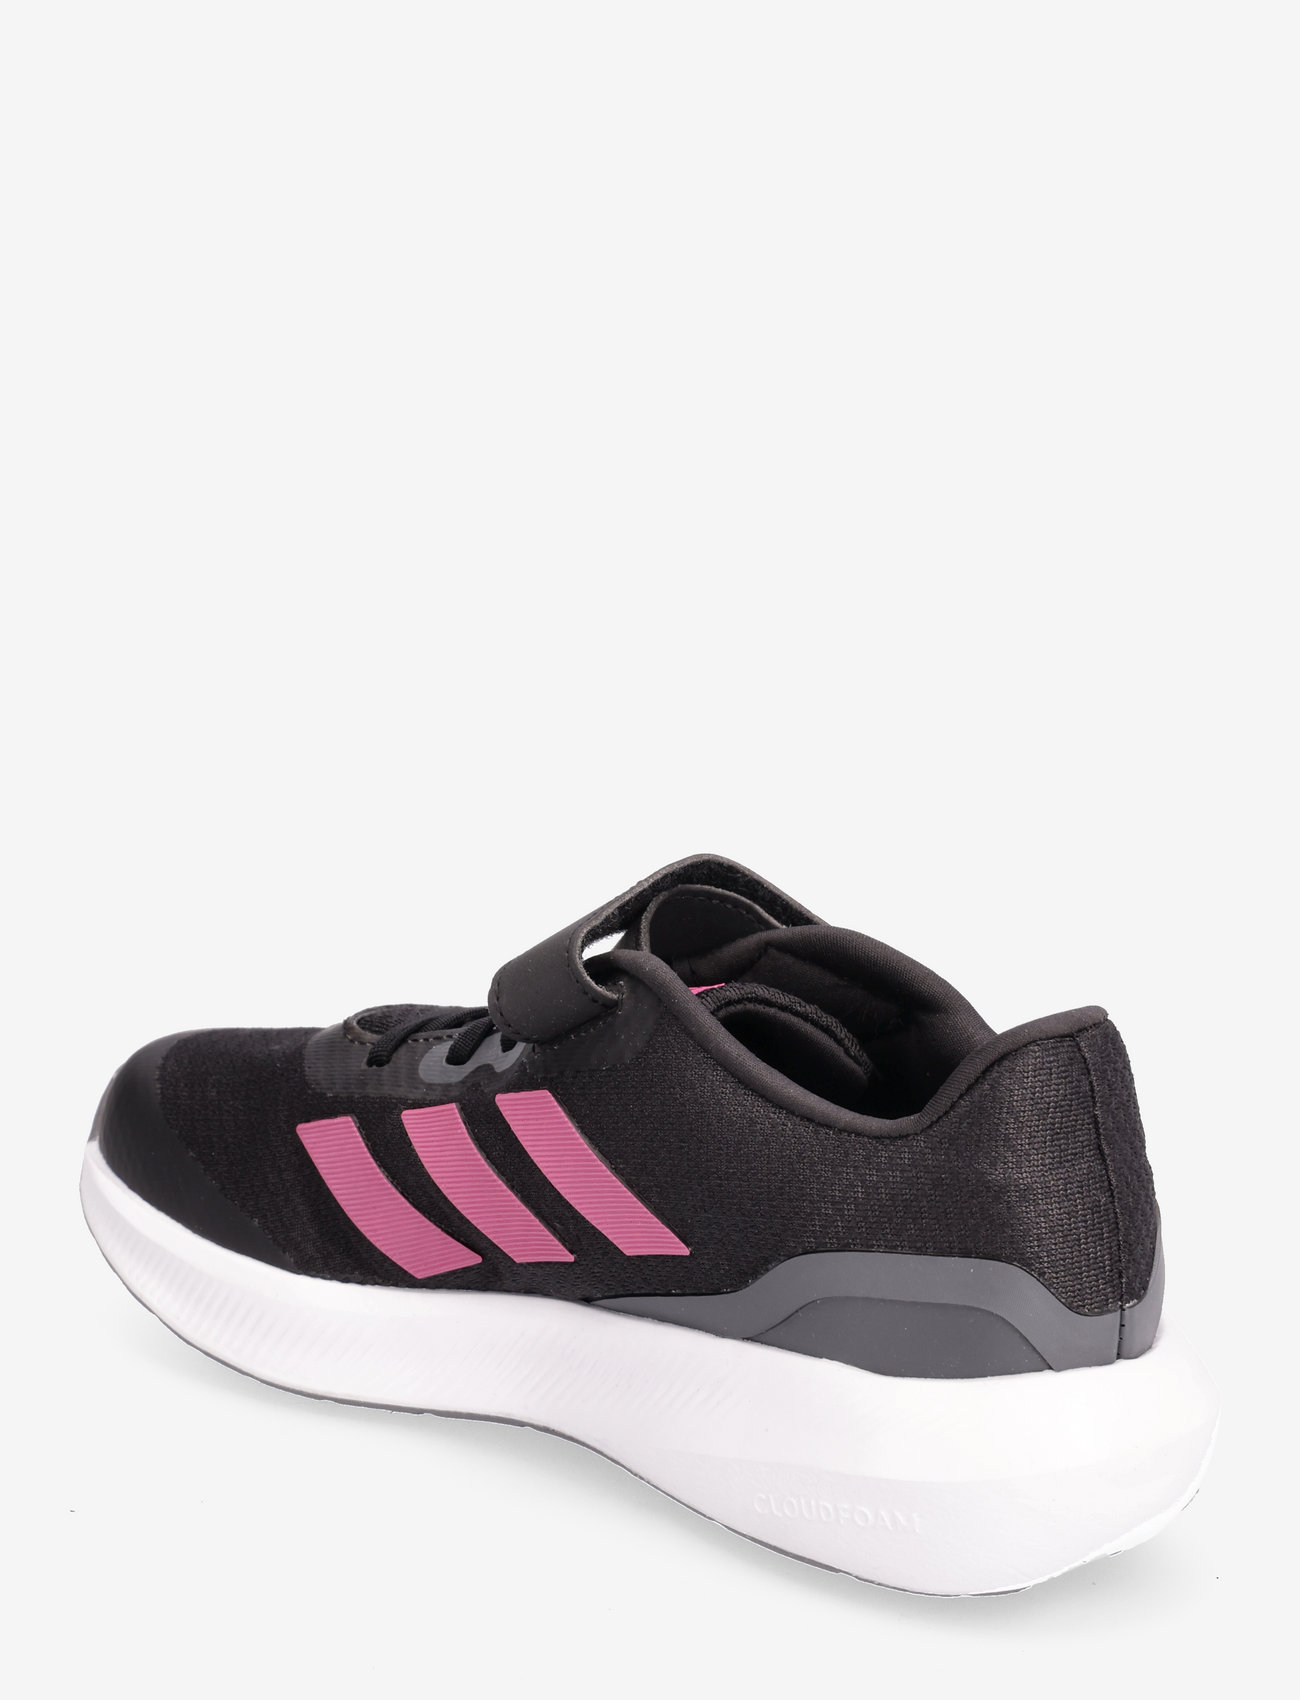 adidas Performance Runfalcon 3.0 Elastic Lace Top Strap Shoes - Sneakers -  Booztlet.com Österreich